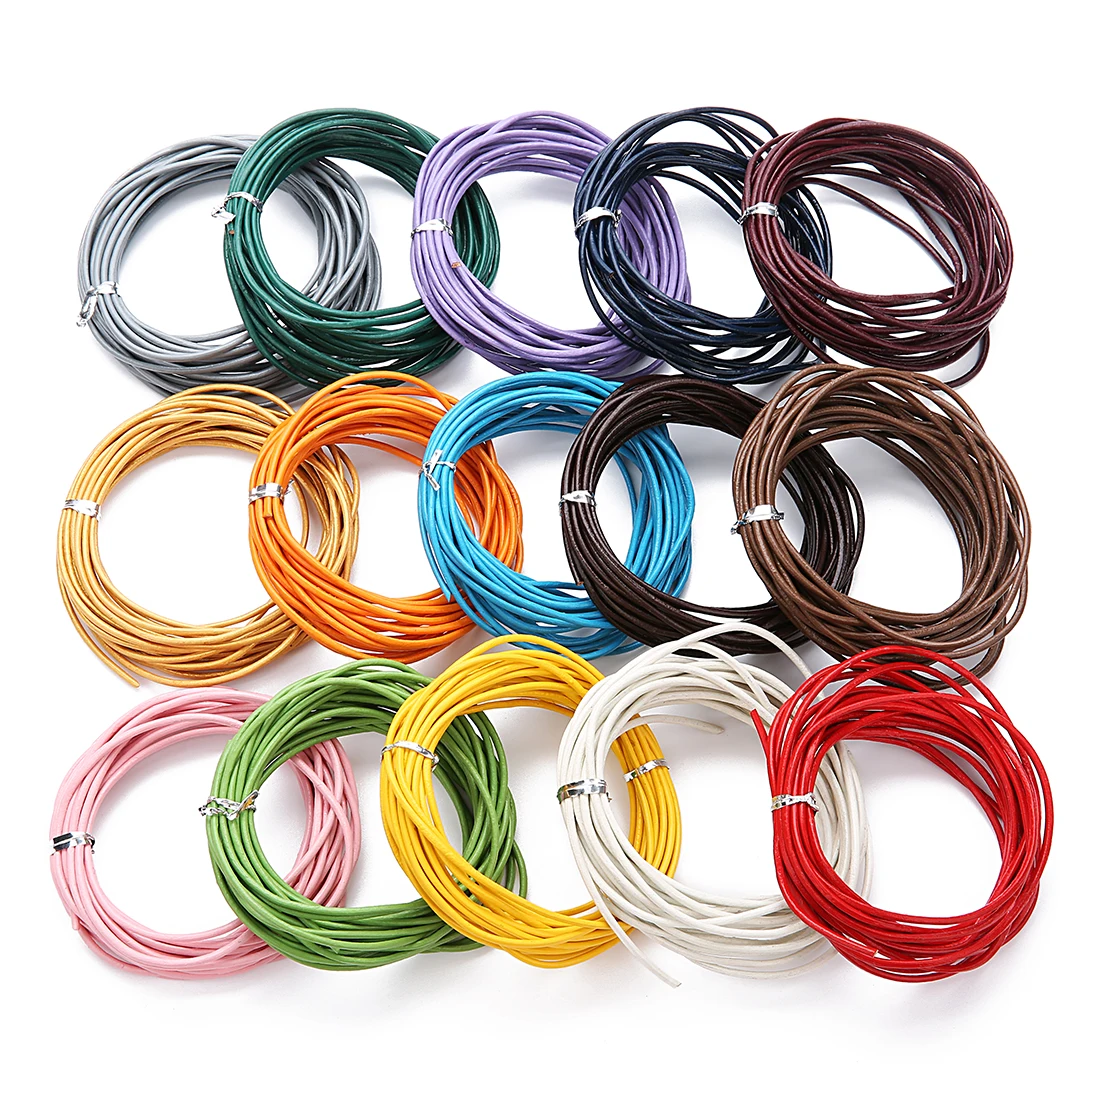 10M Real Leather Cord Thread Jewelry Necklace Bracelet Making 1/1.5/2/3mm 